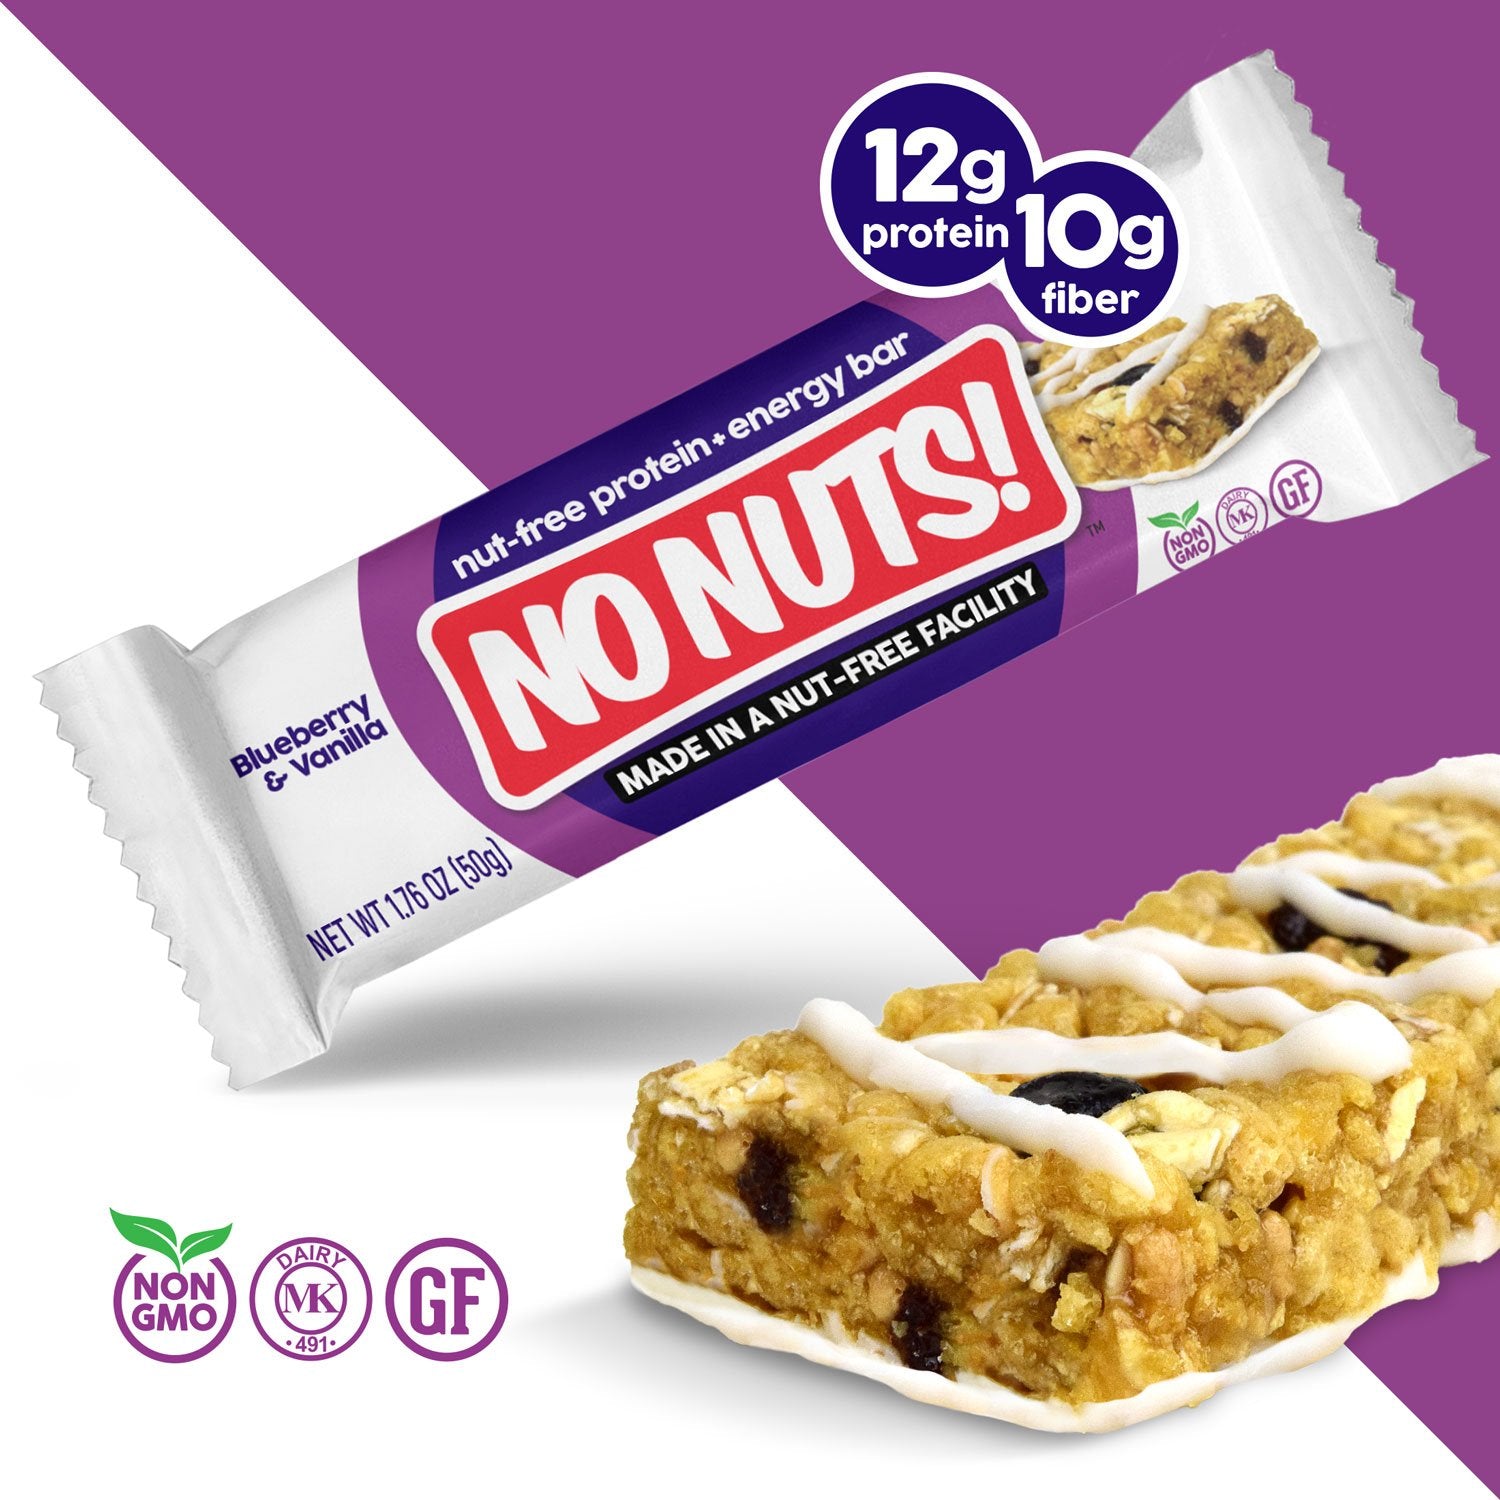 Nut-Free and Dairy-Free Protein Bar